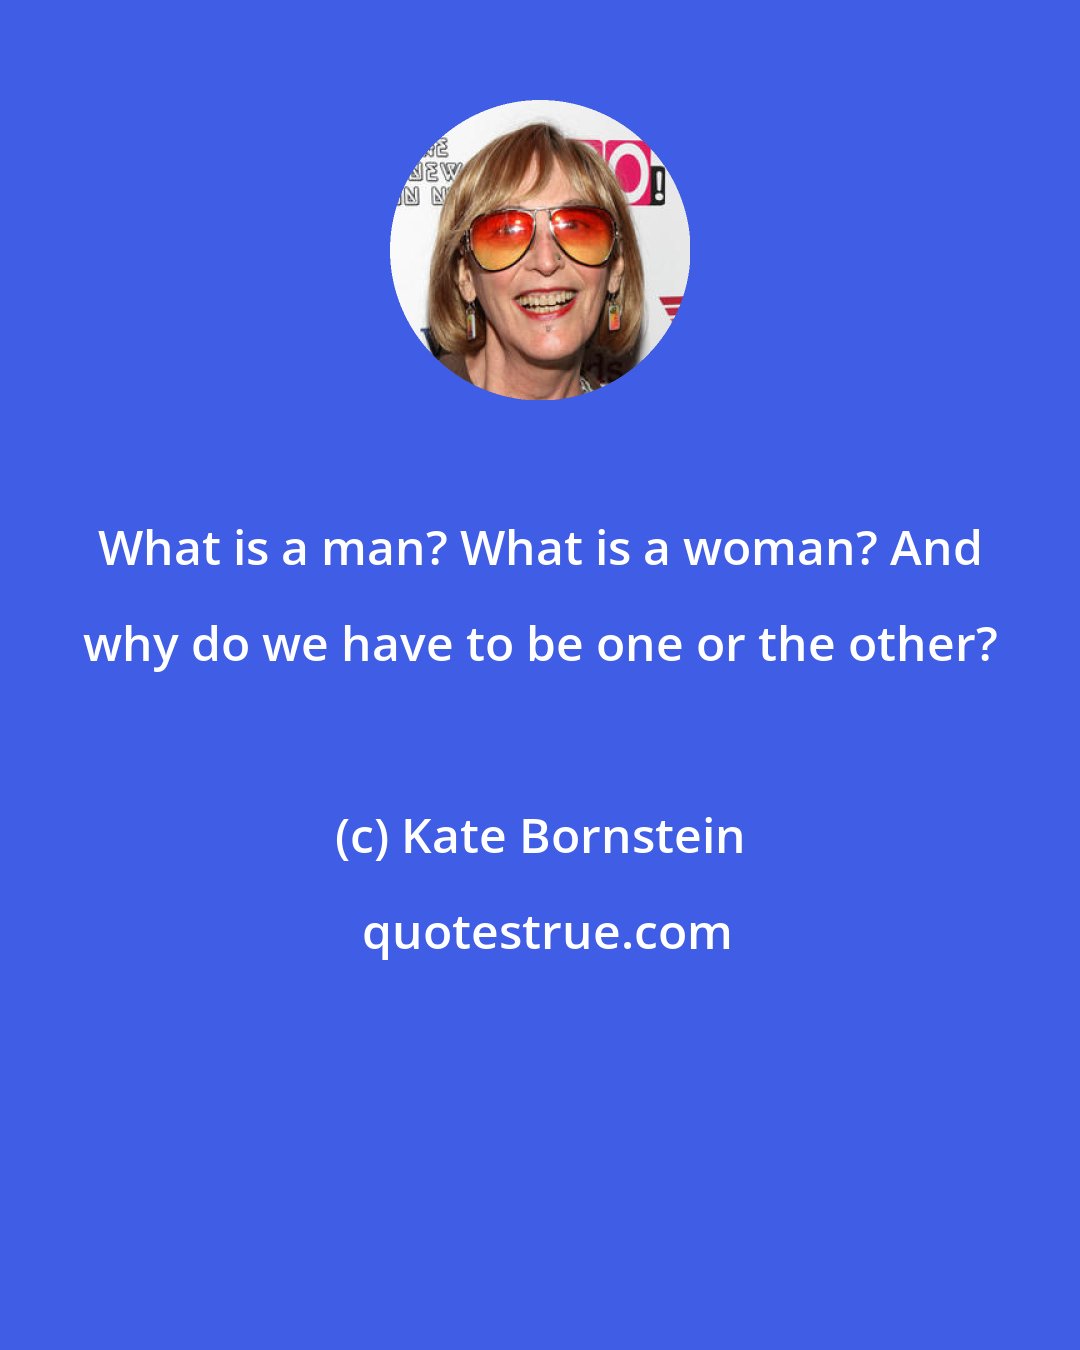 Kate Bornstein: What is a man? What is a woman? And why do we have to be one or the other?